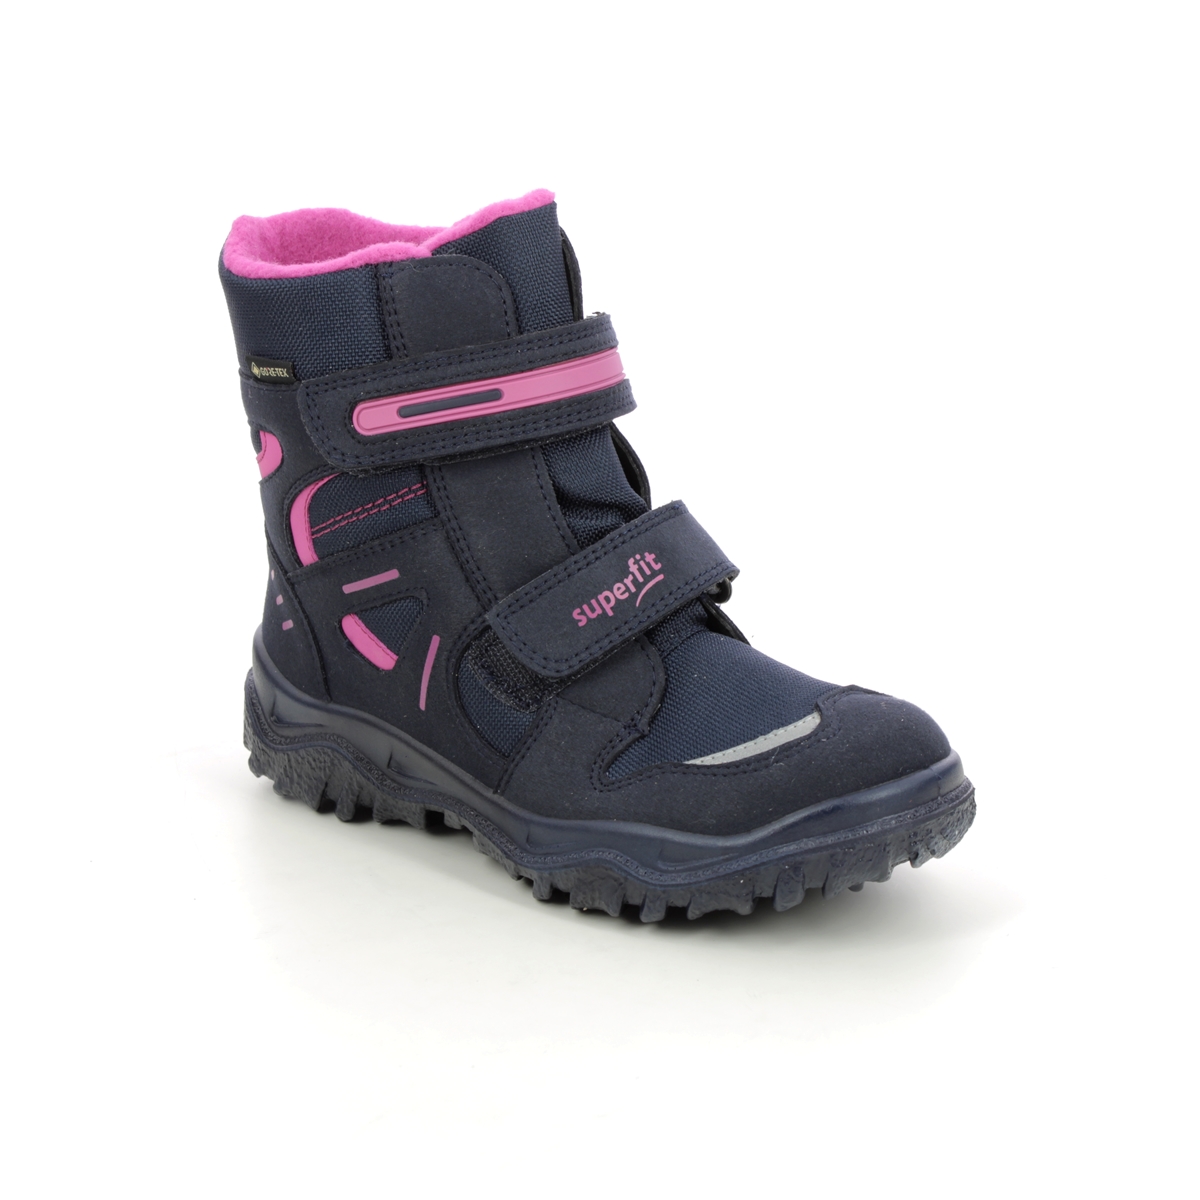 Superfit Husky Jnr Gore Navy Pink Kids Girls Boots 1809080-8020 In Size 28 In Plain Navy Pink For kids